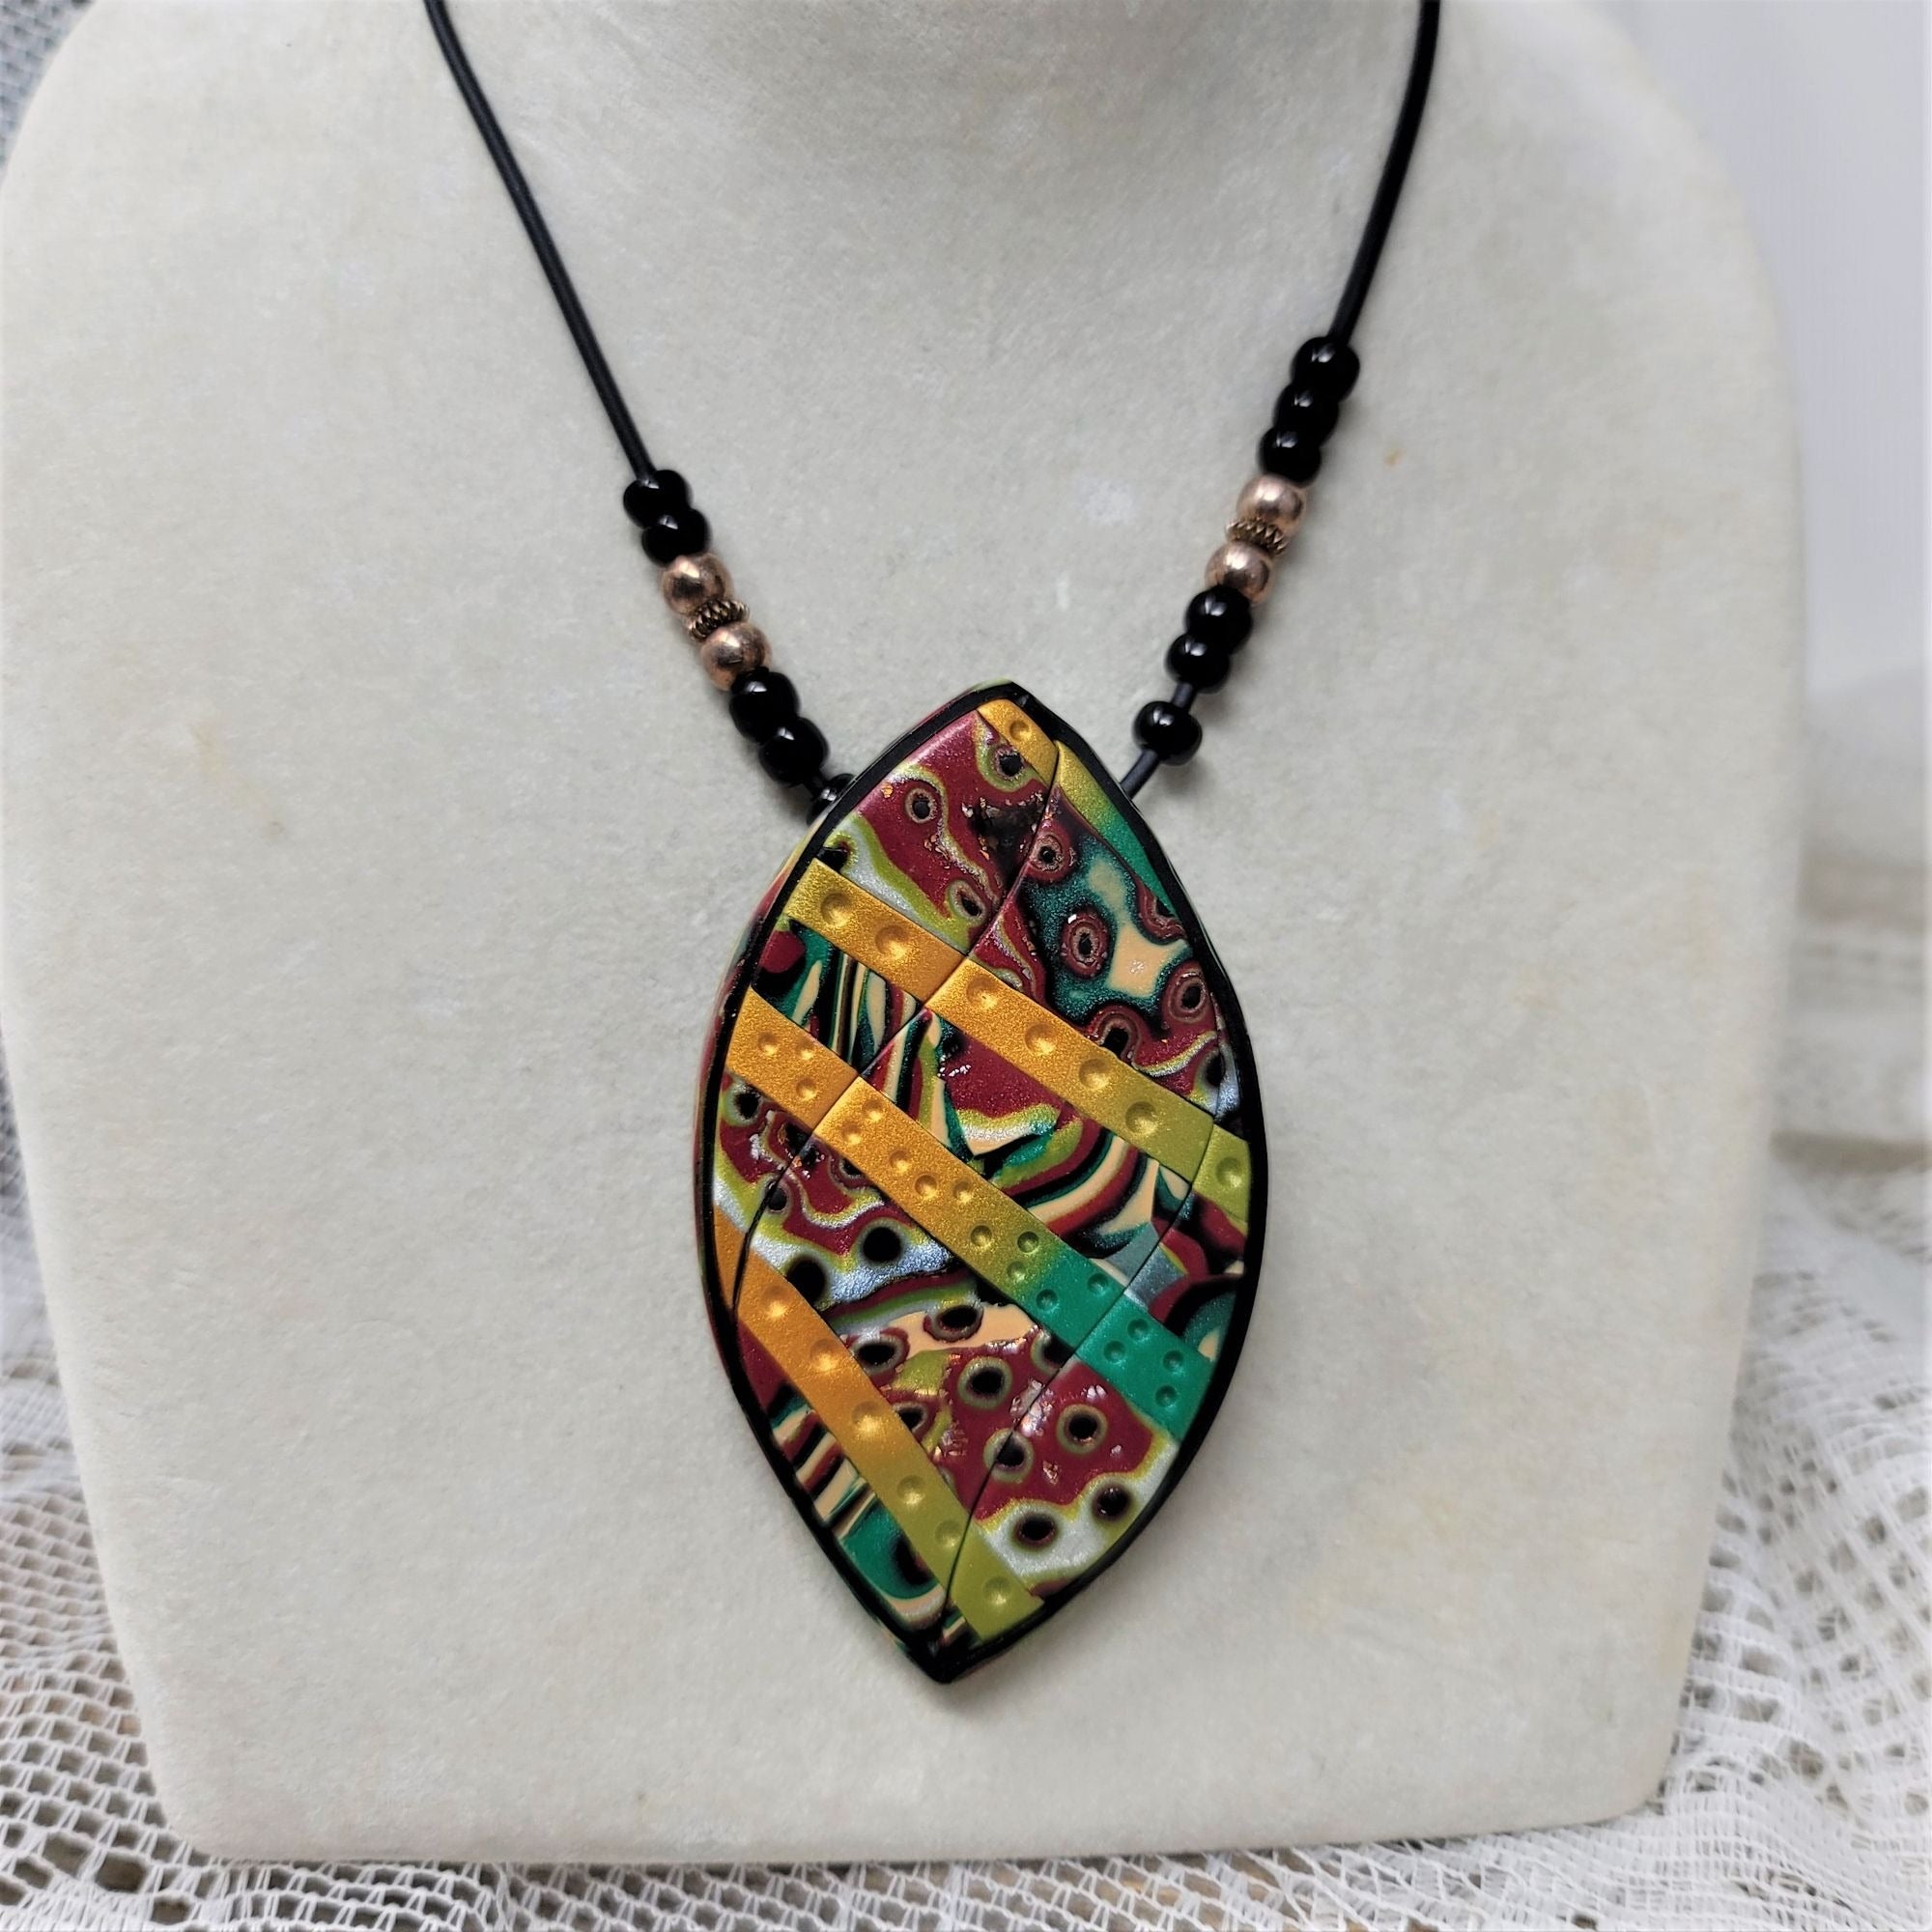 Modern Clay Colorful Necklace w/ Black Cord